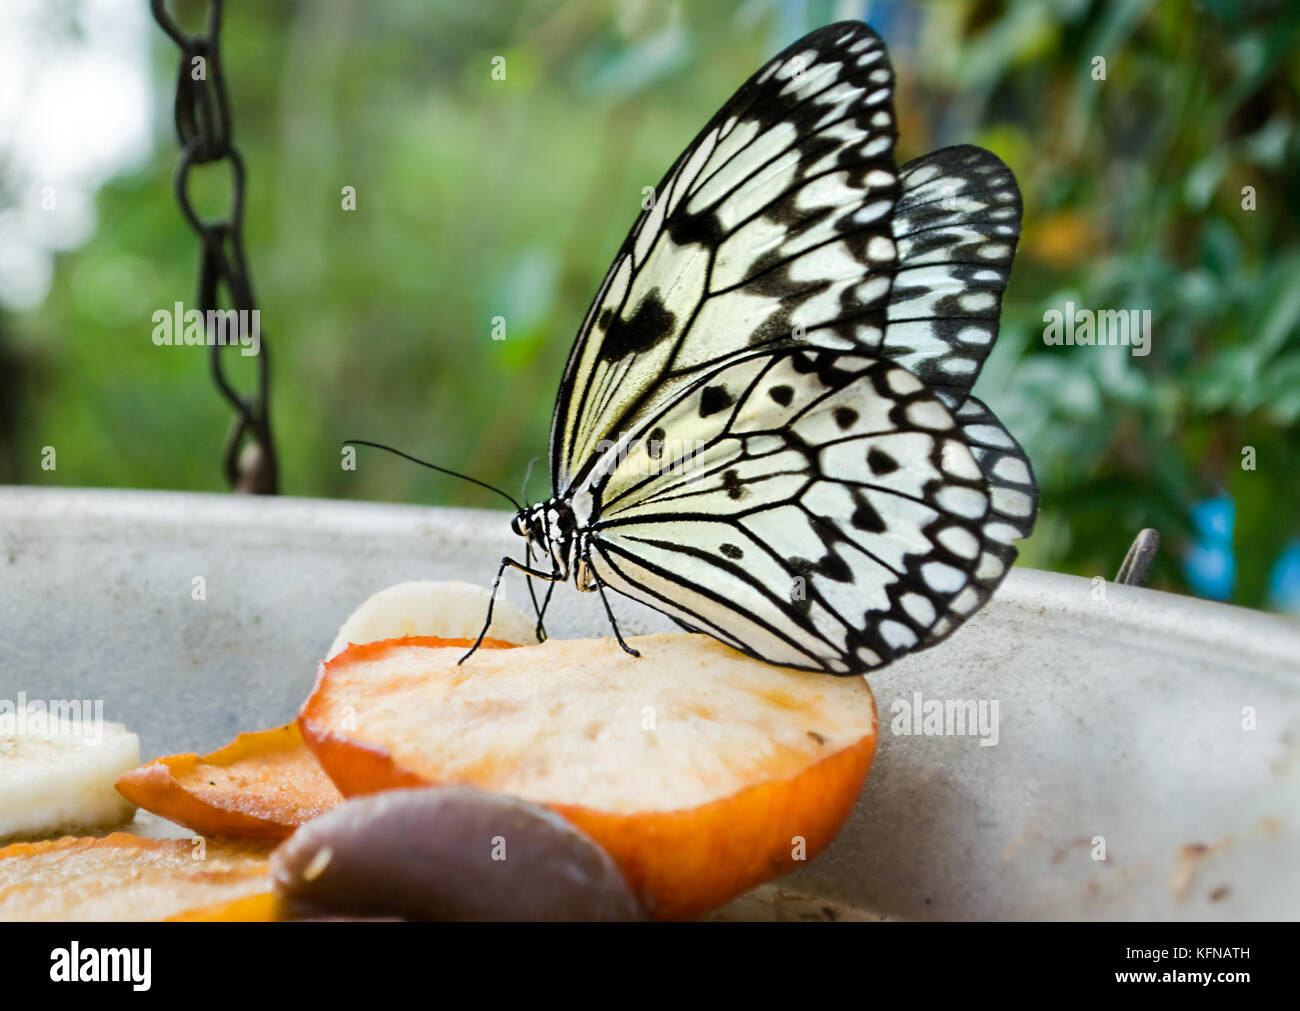 white Tree Nymph butterfly feeding on apple in captivity. Stock Photo